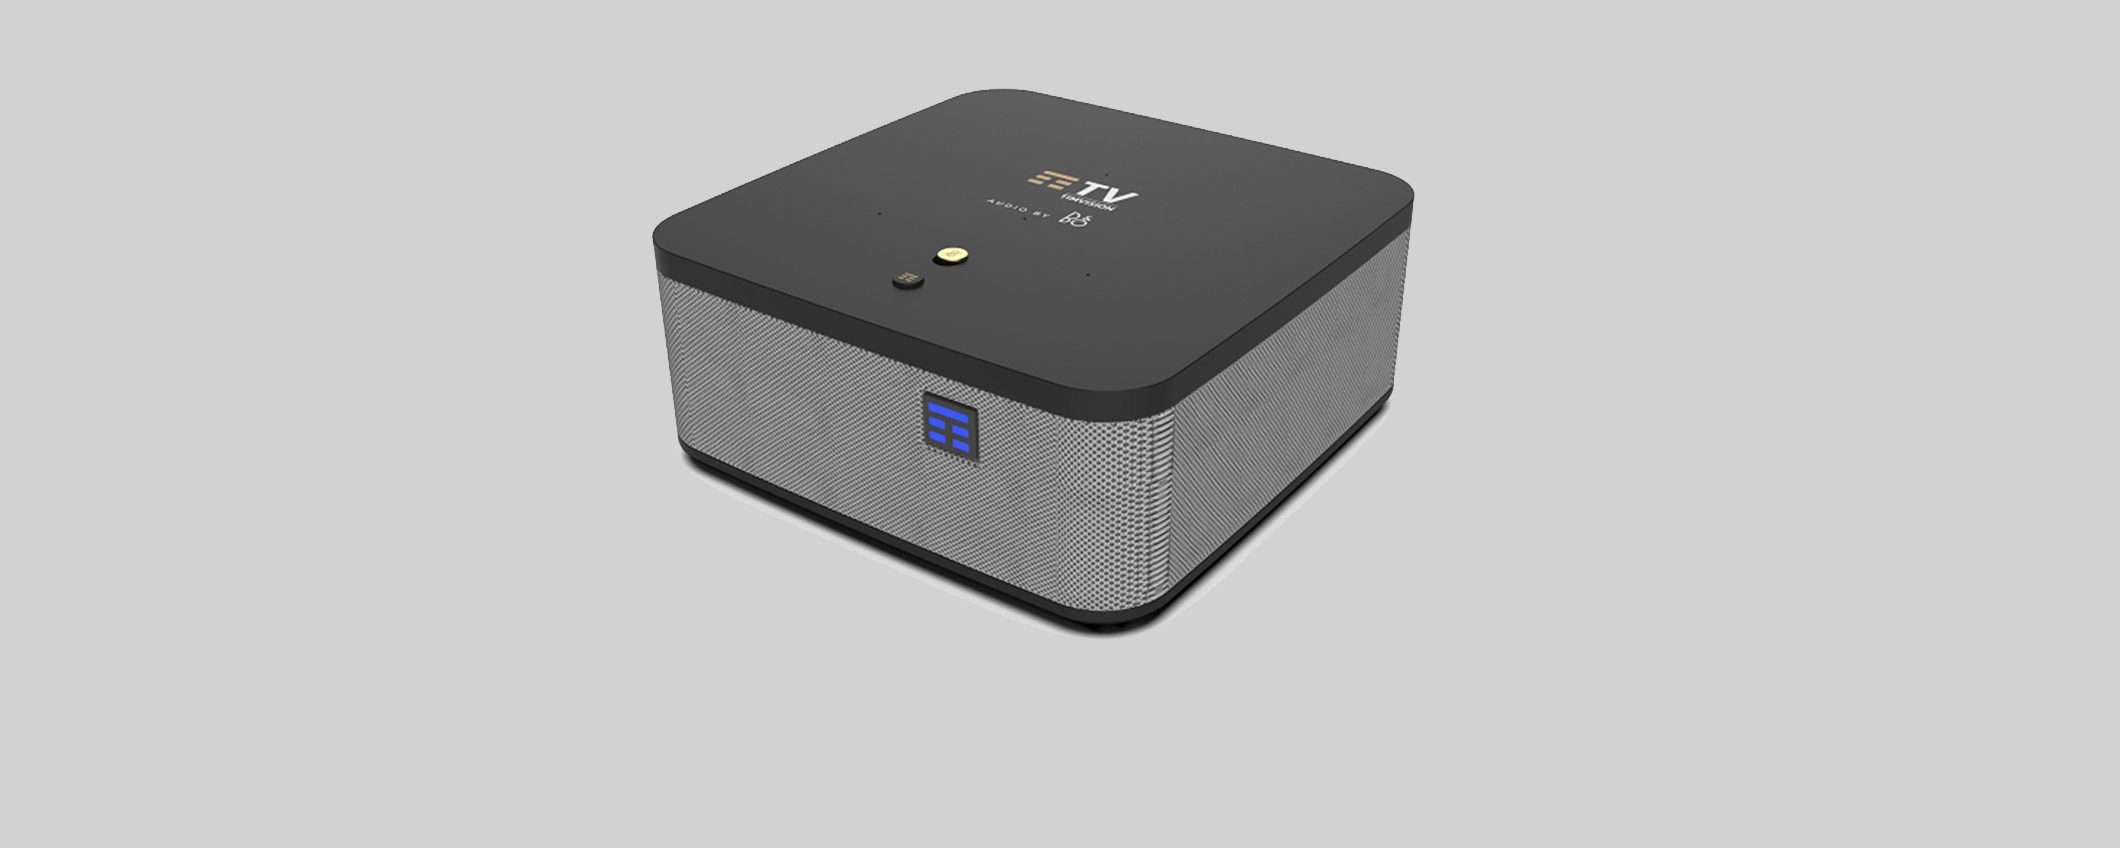 TIMVISION Box Atmosphere: nuovo decoder Wi-Fi 6